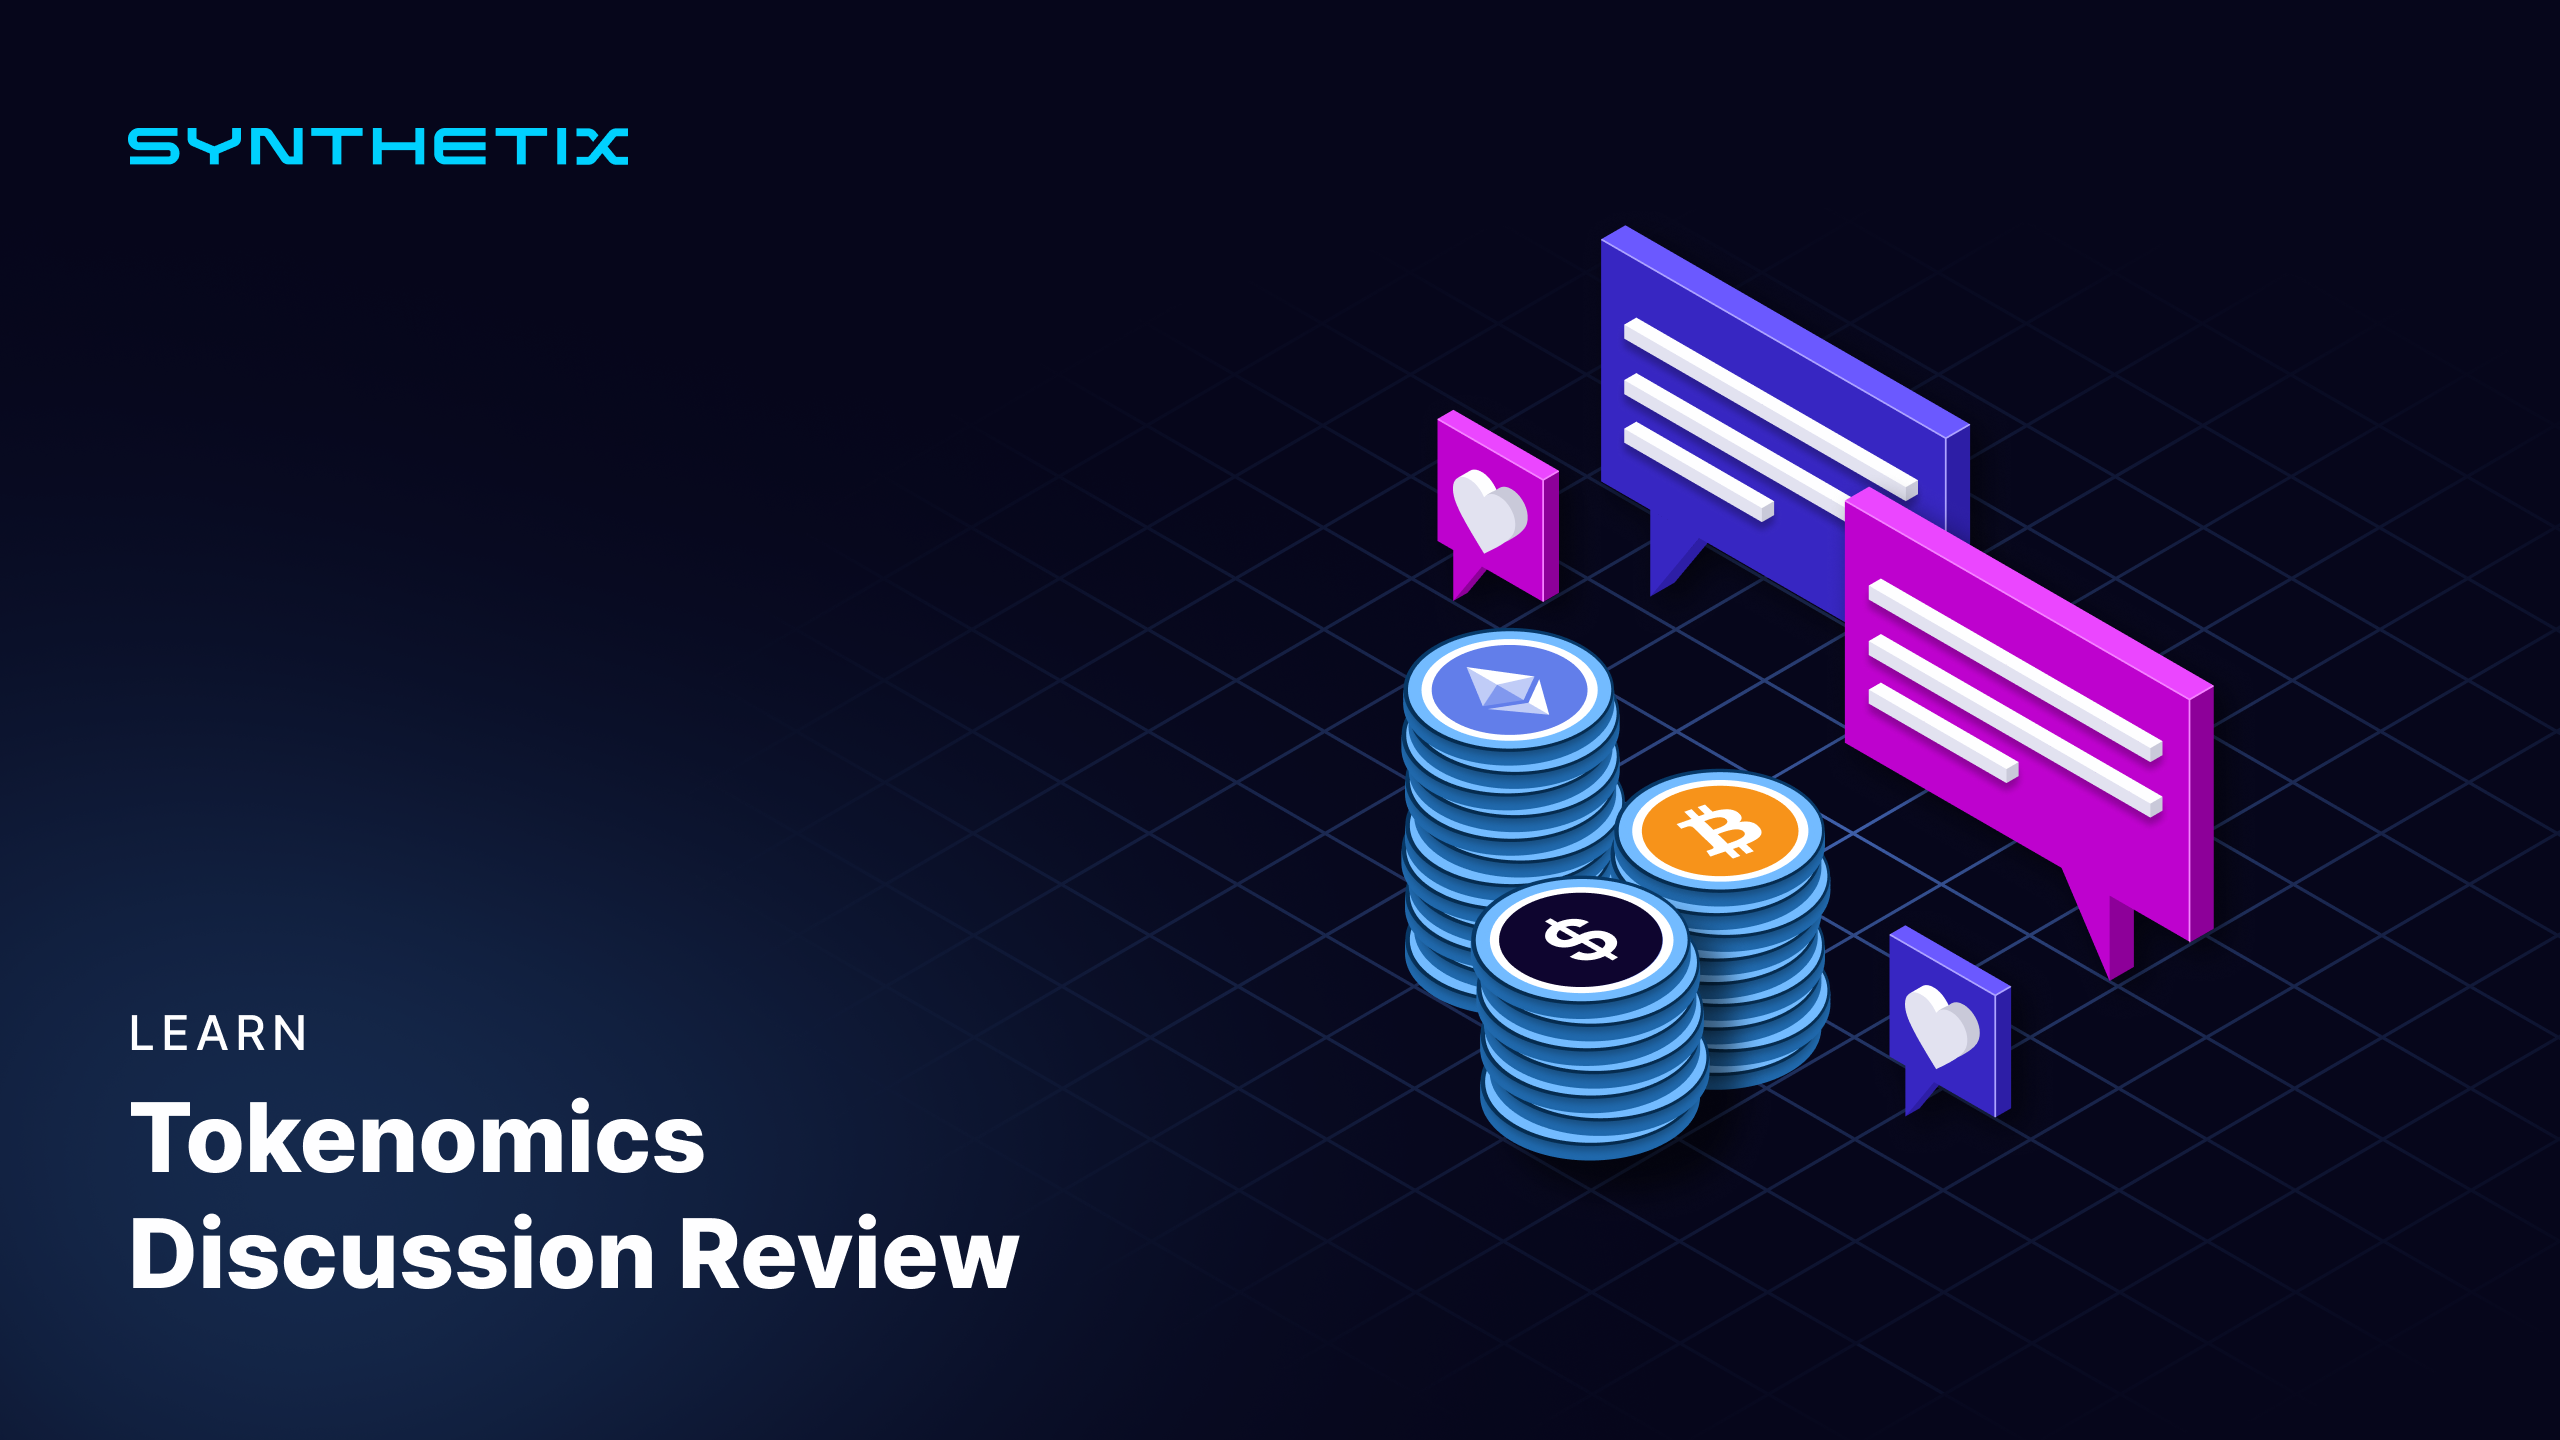 Tokenomics Discussion Review